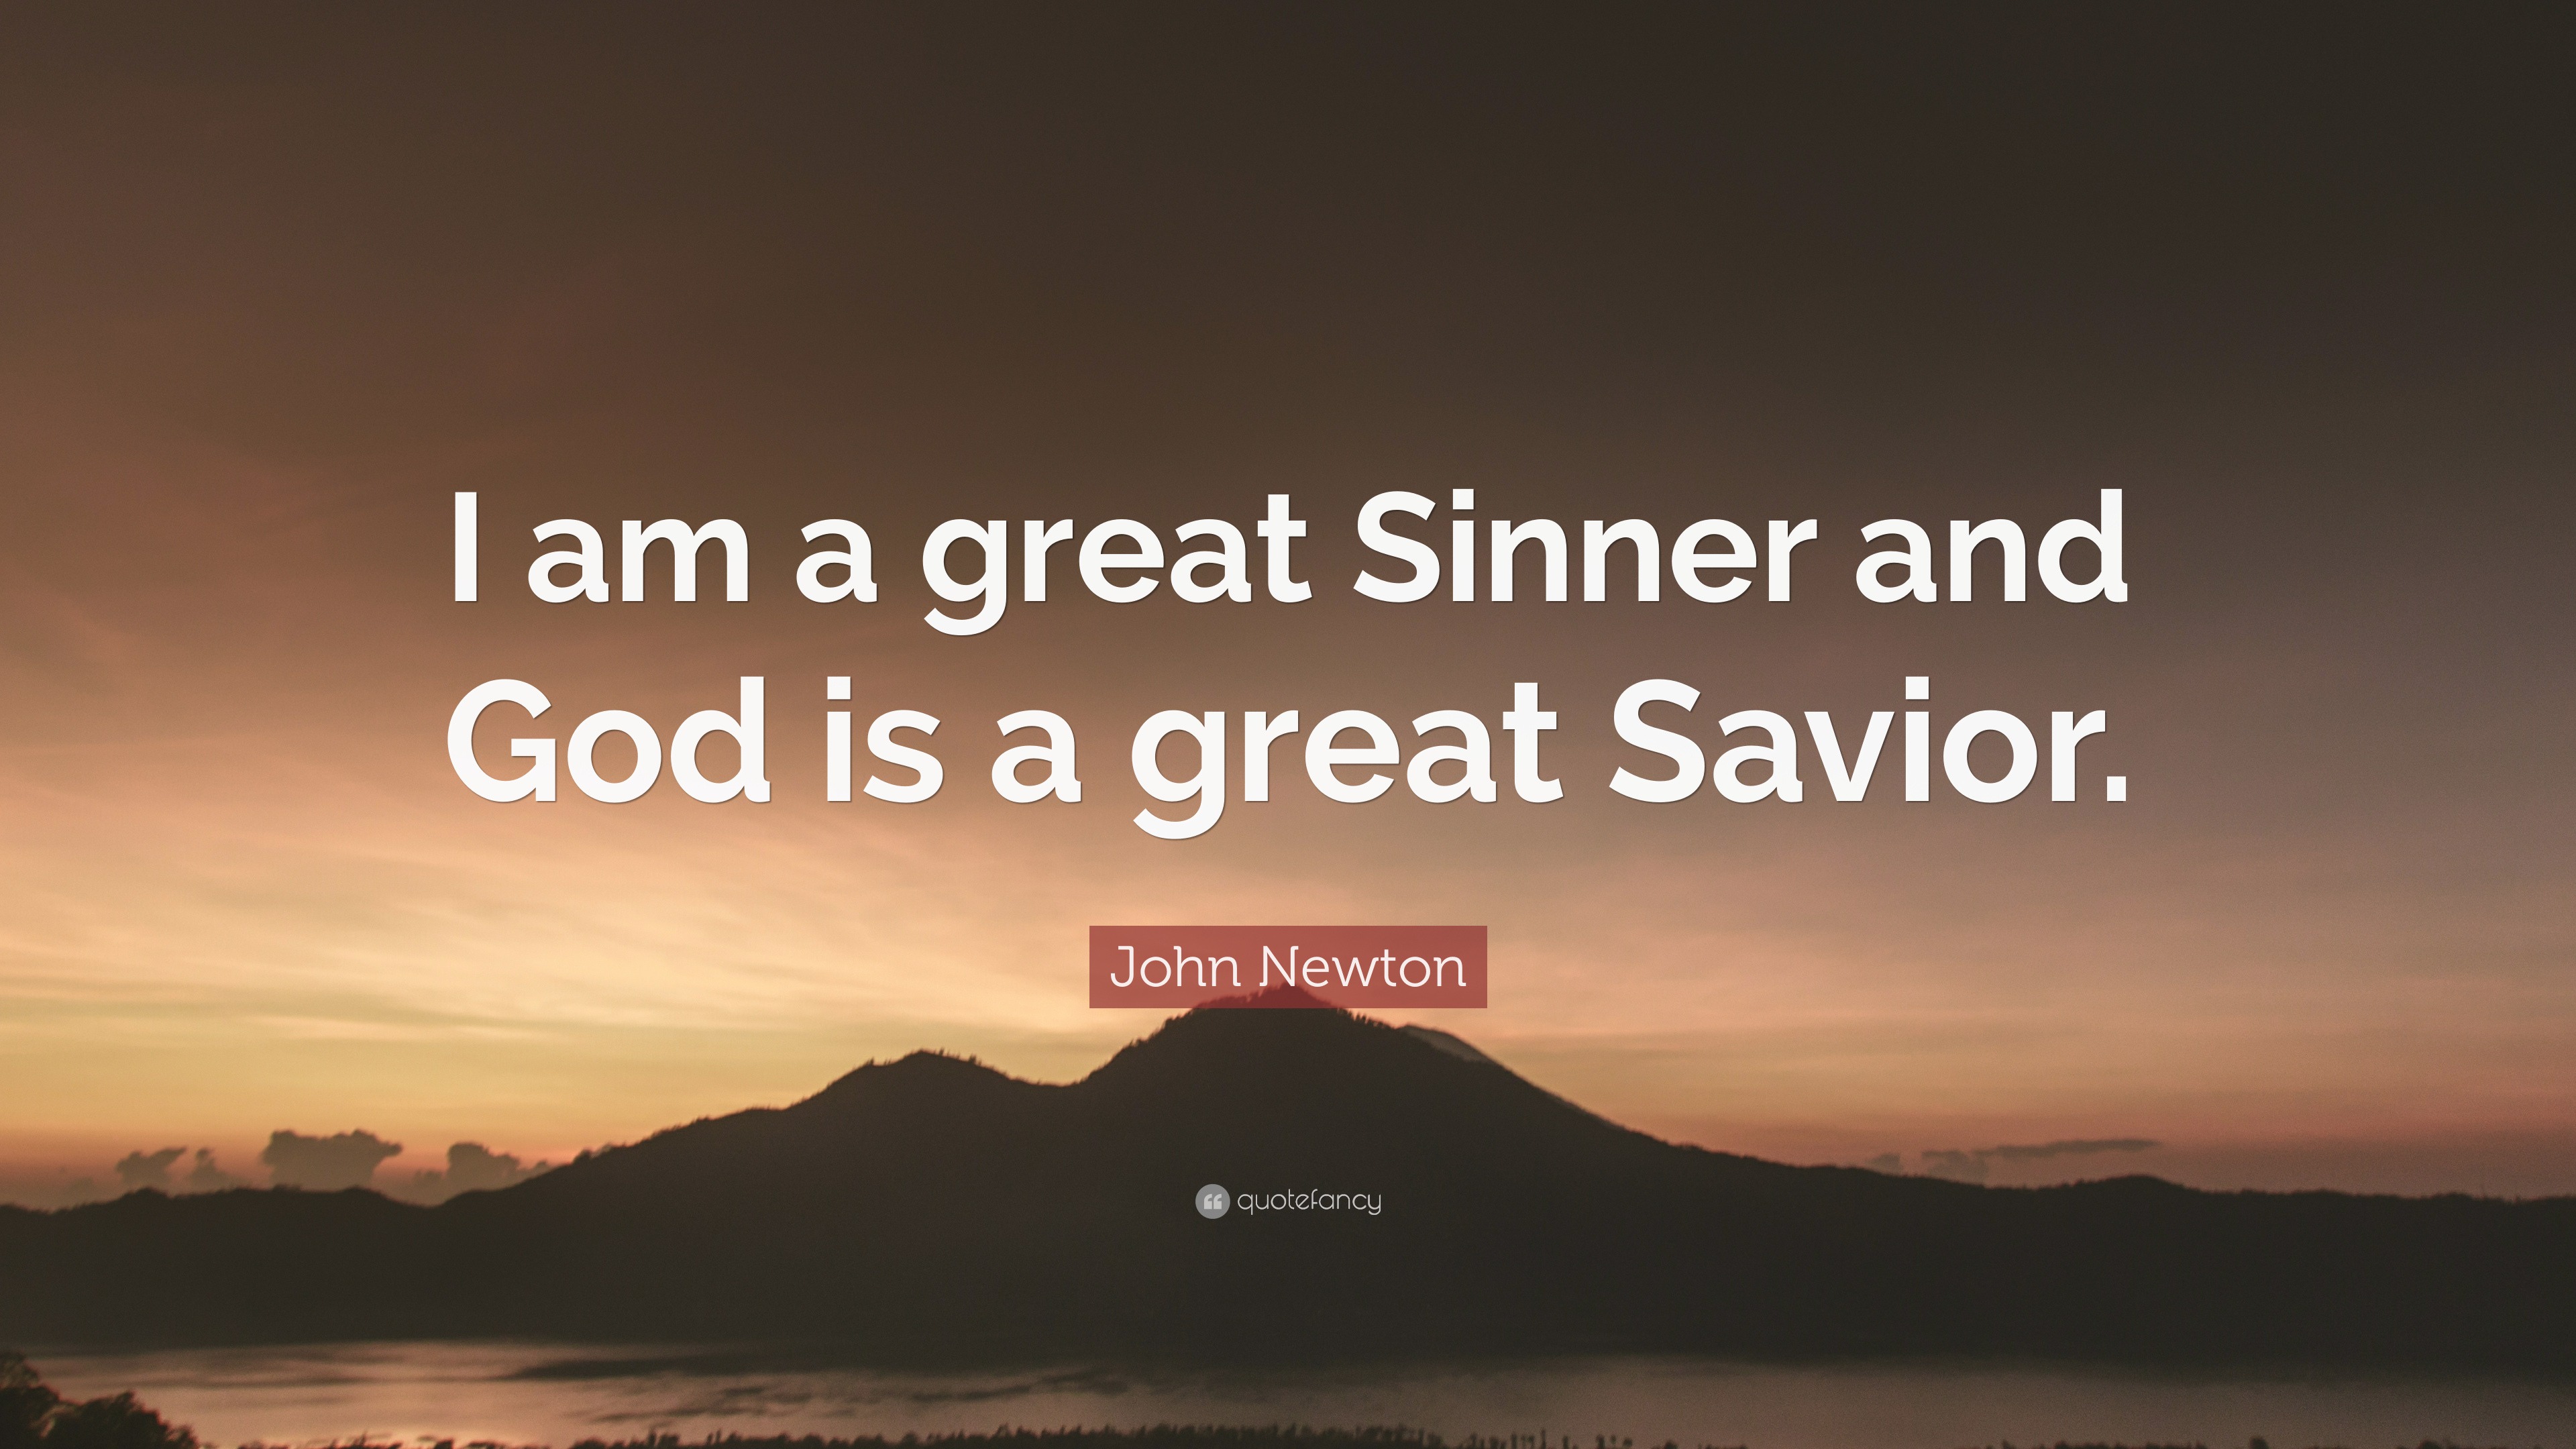 John Newton Quote: "I am a great Sinner and God is a great Savior." (9 ...